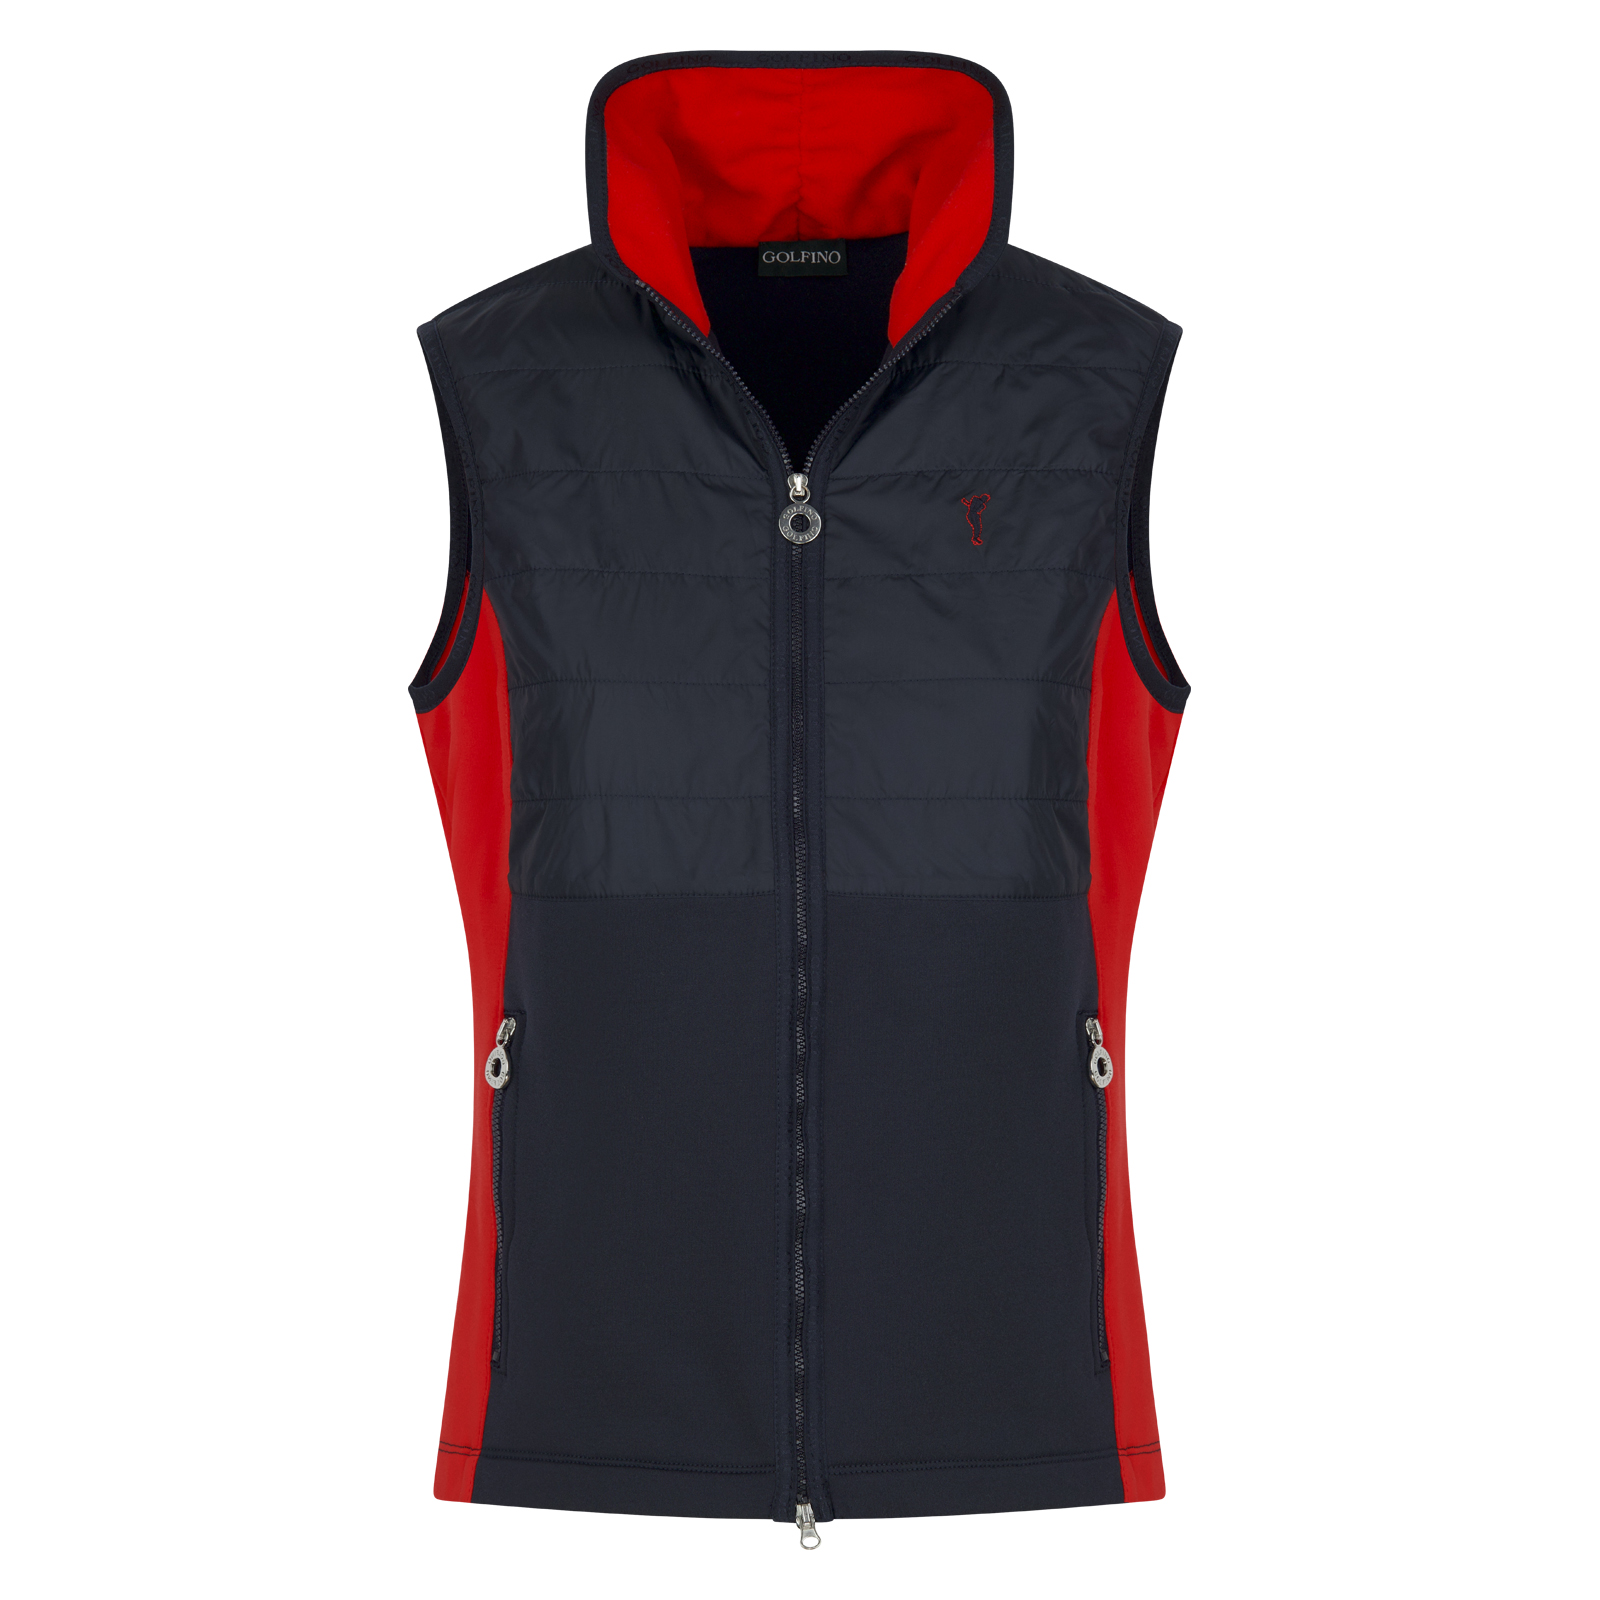 Ladies' stretch golf waistcoat with wind protection